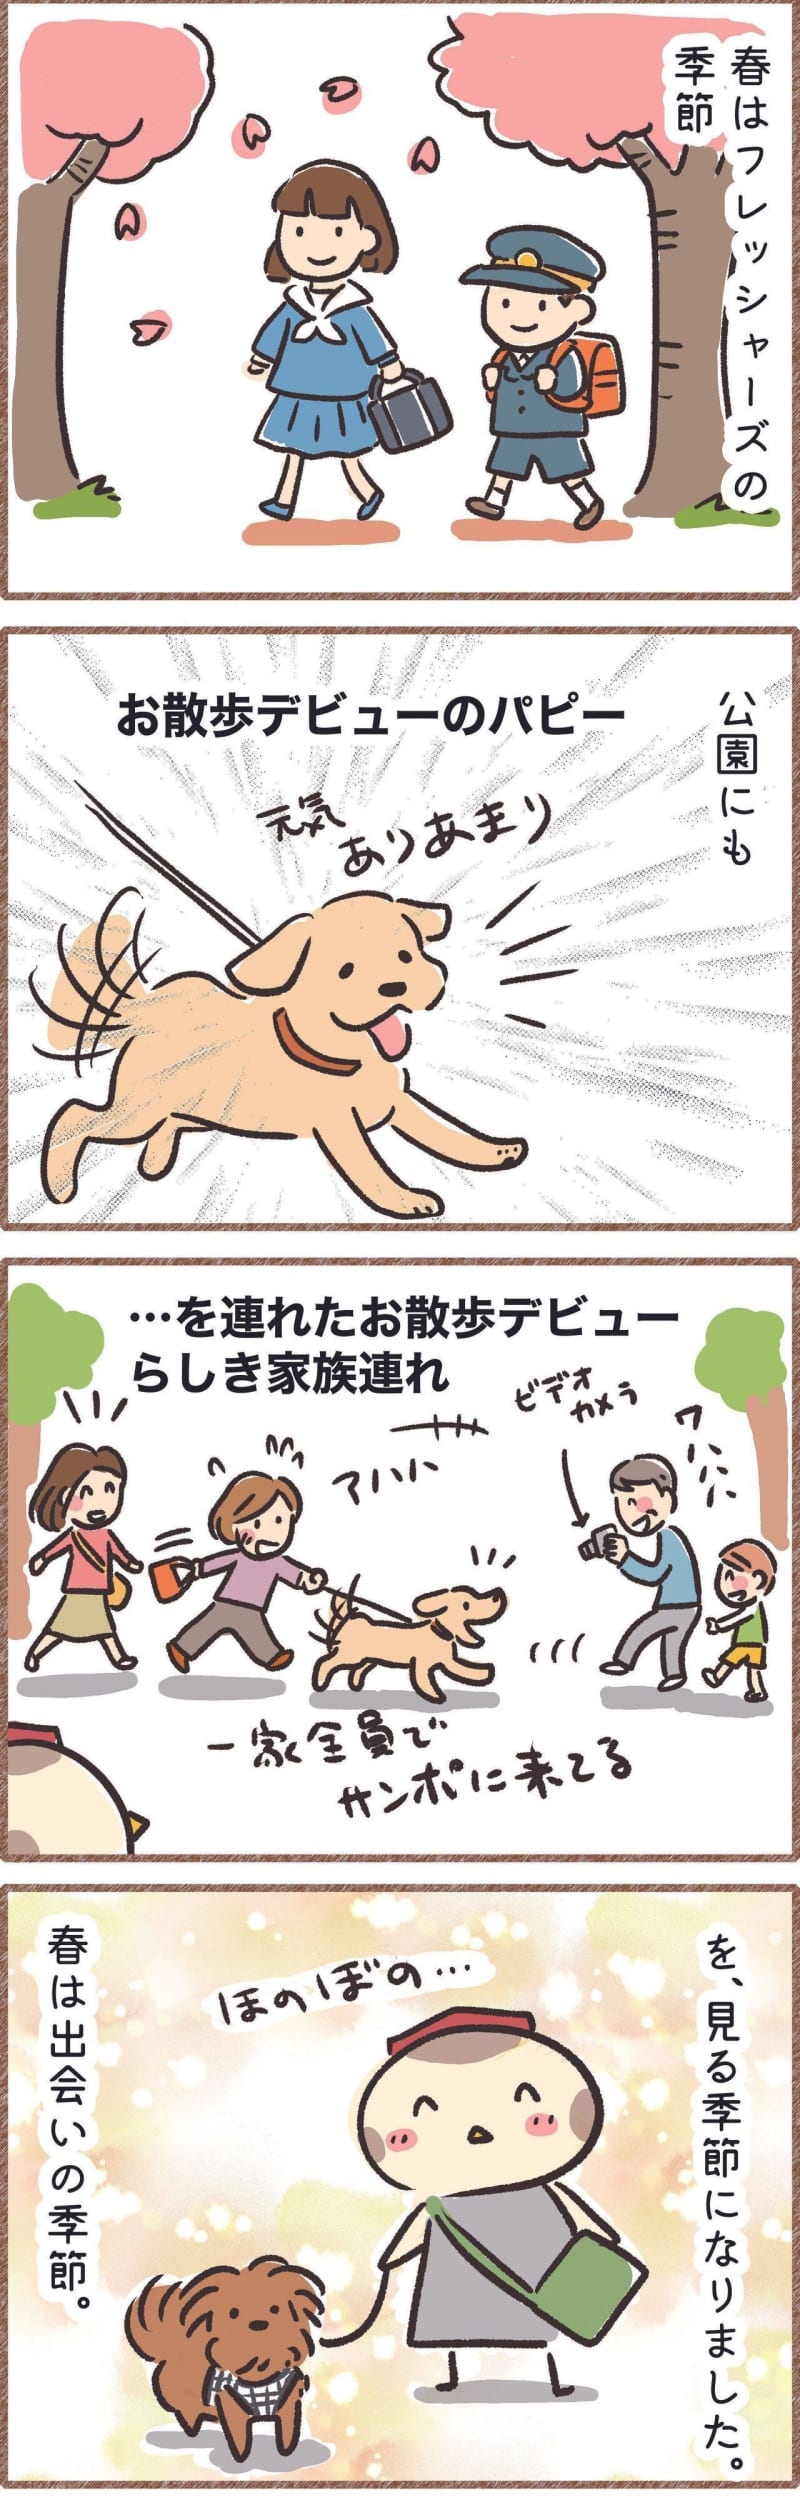 Spring is the season for dating.Smile at the park debut dog and family | Series "Koguma Inu Tensuke" vol...